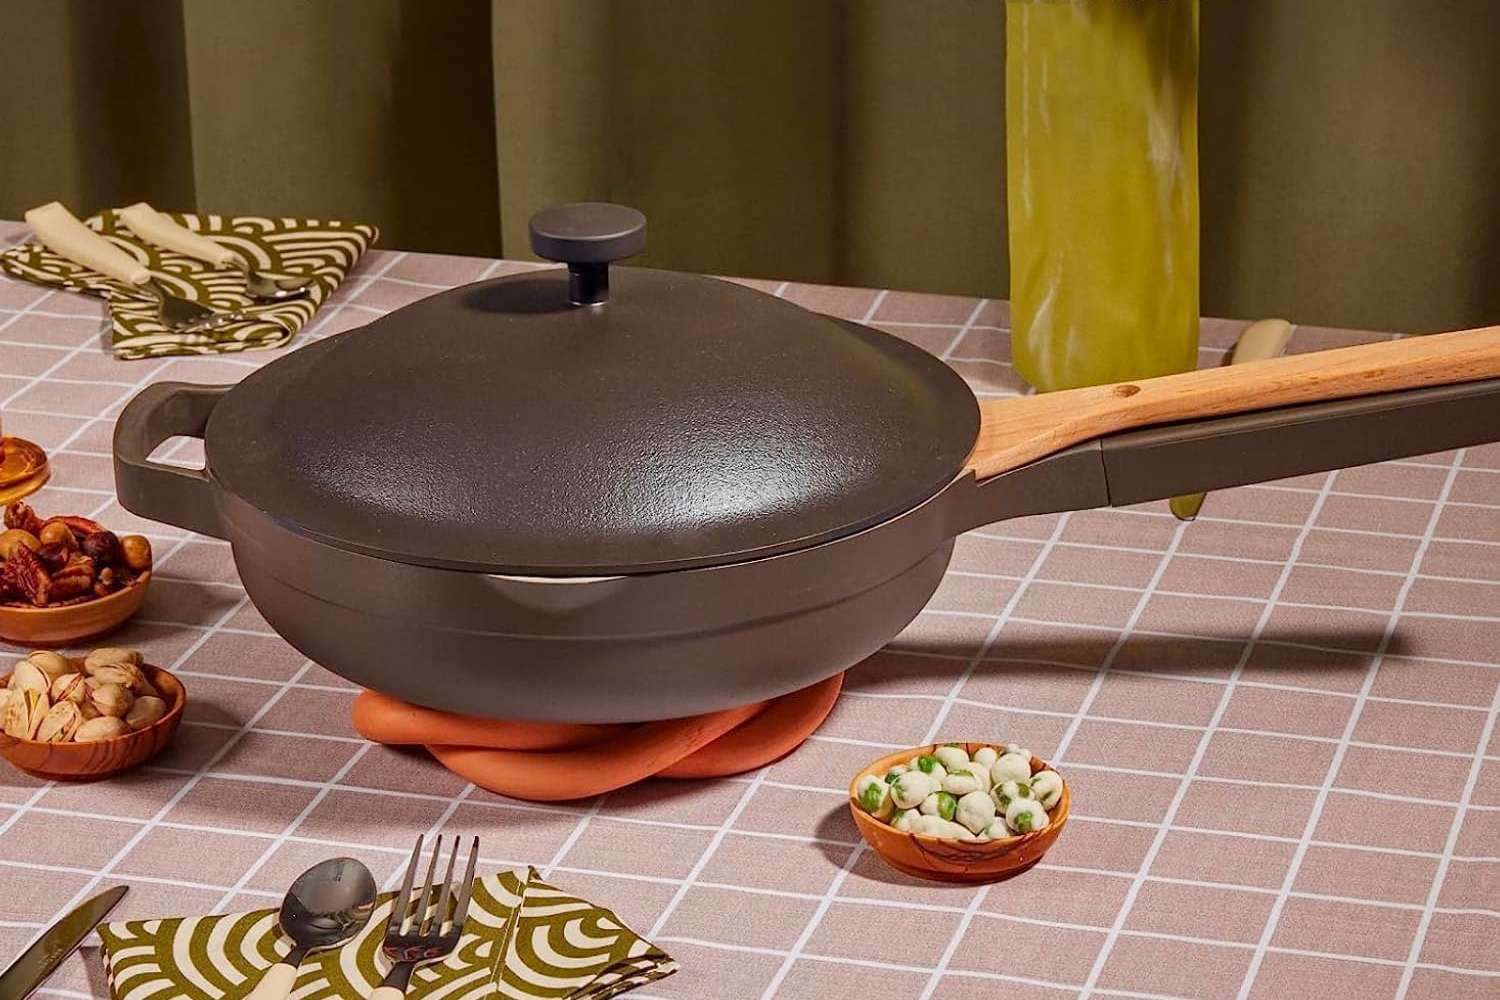 Our Places Clever Kitchenware Is Secretly Up to 40% Off at Amazon [Video]